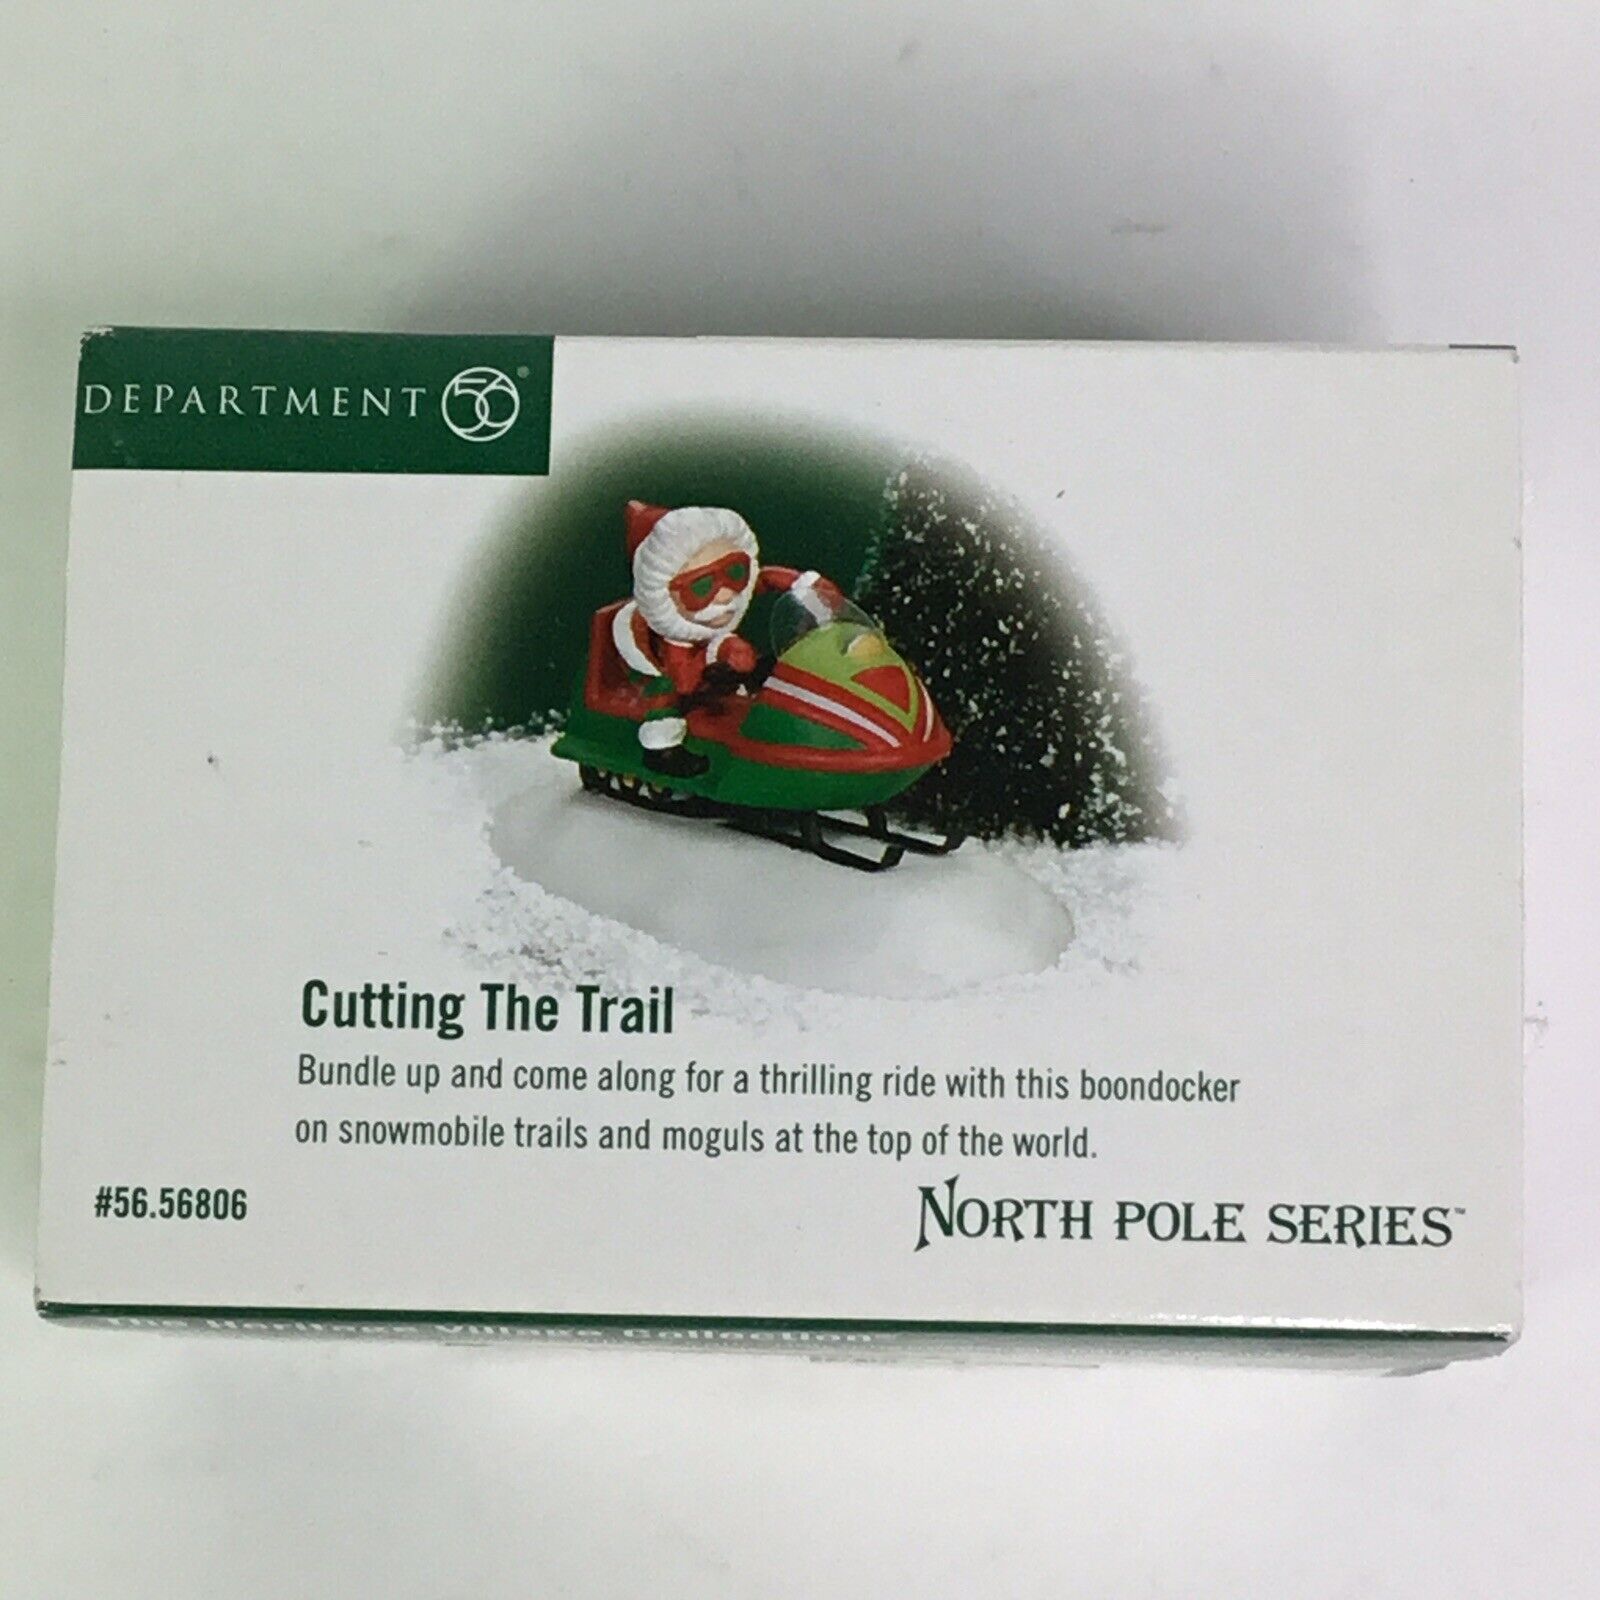 Dept 56 North Pole Series CUTTING THE TRAIL #56-56806